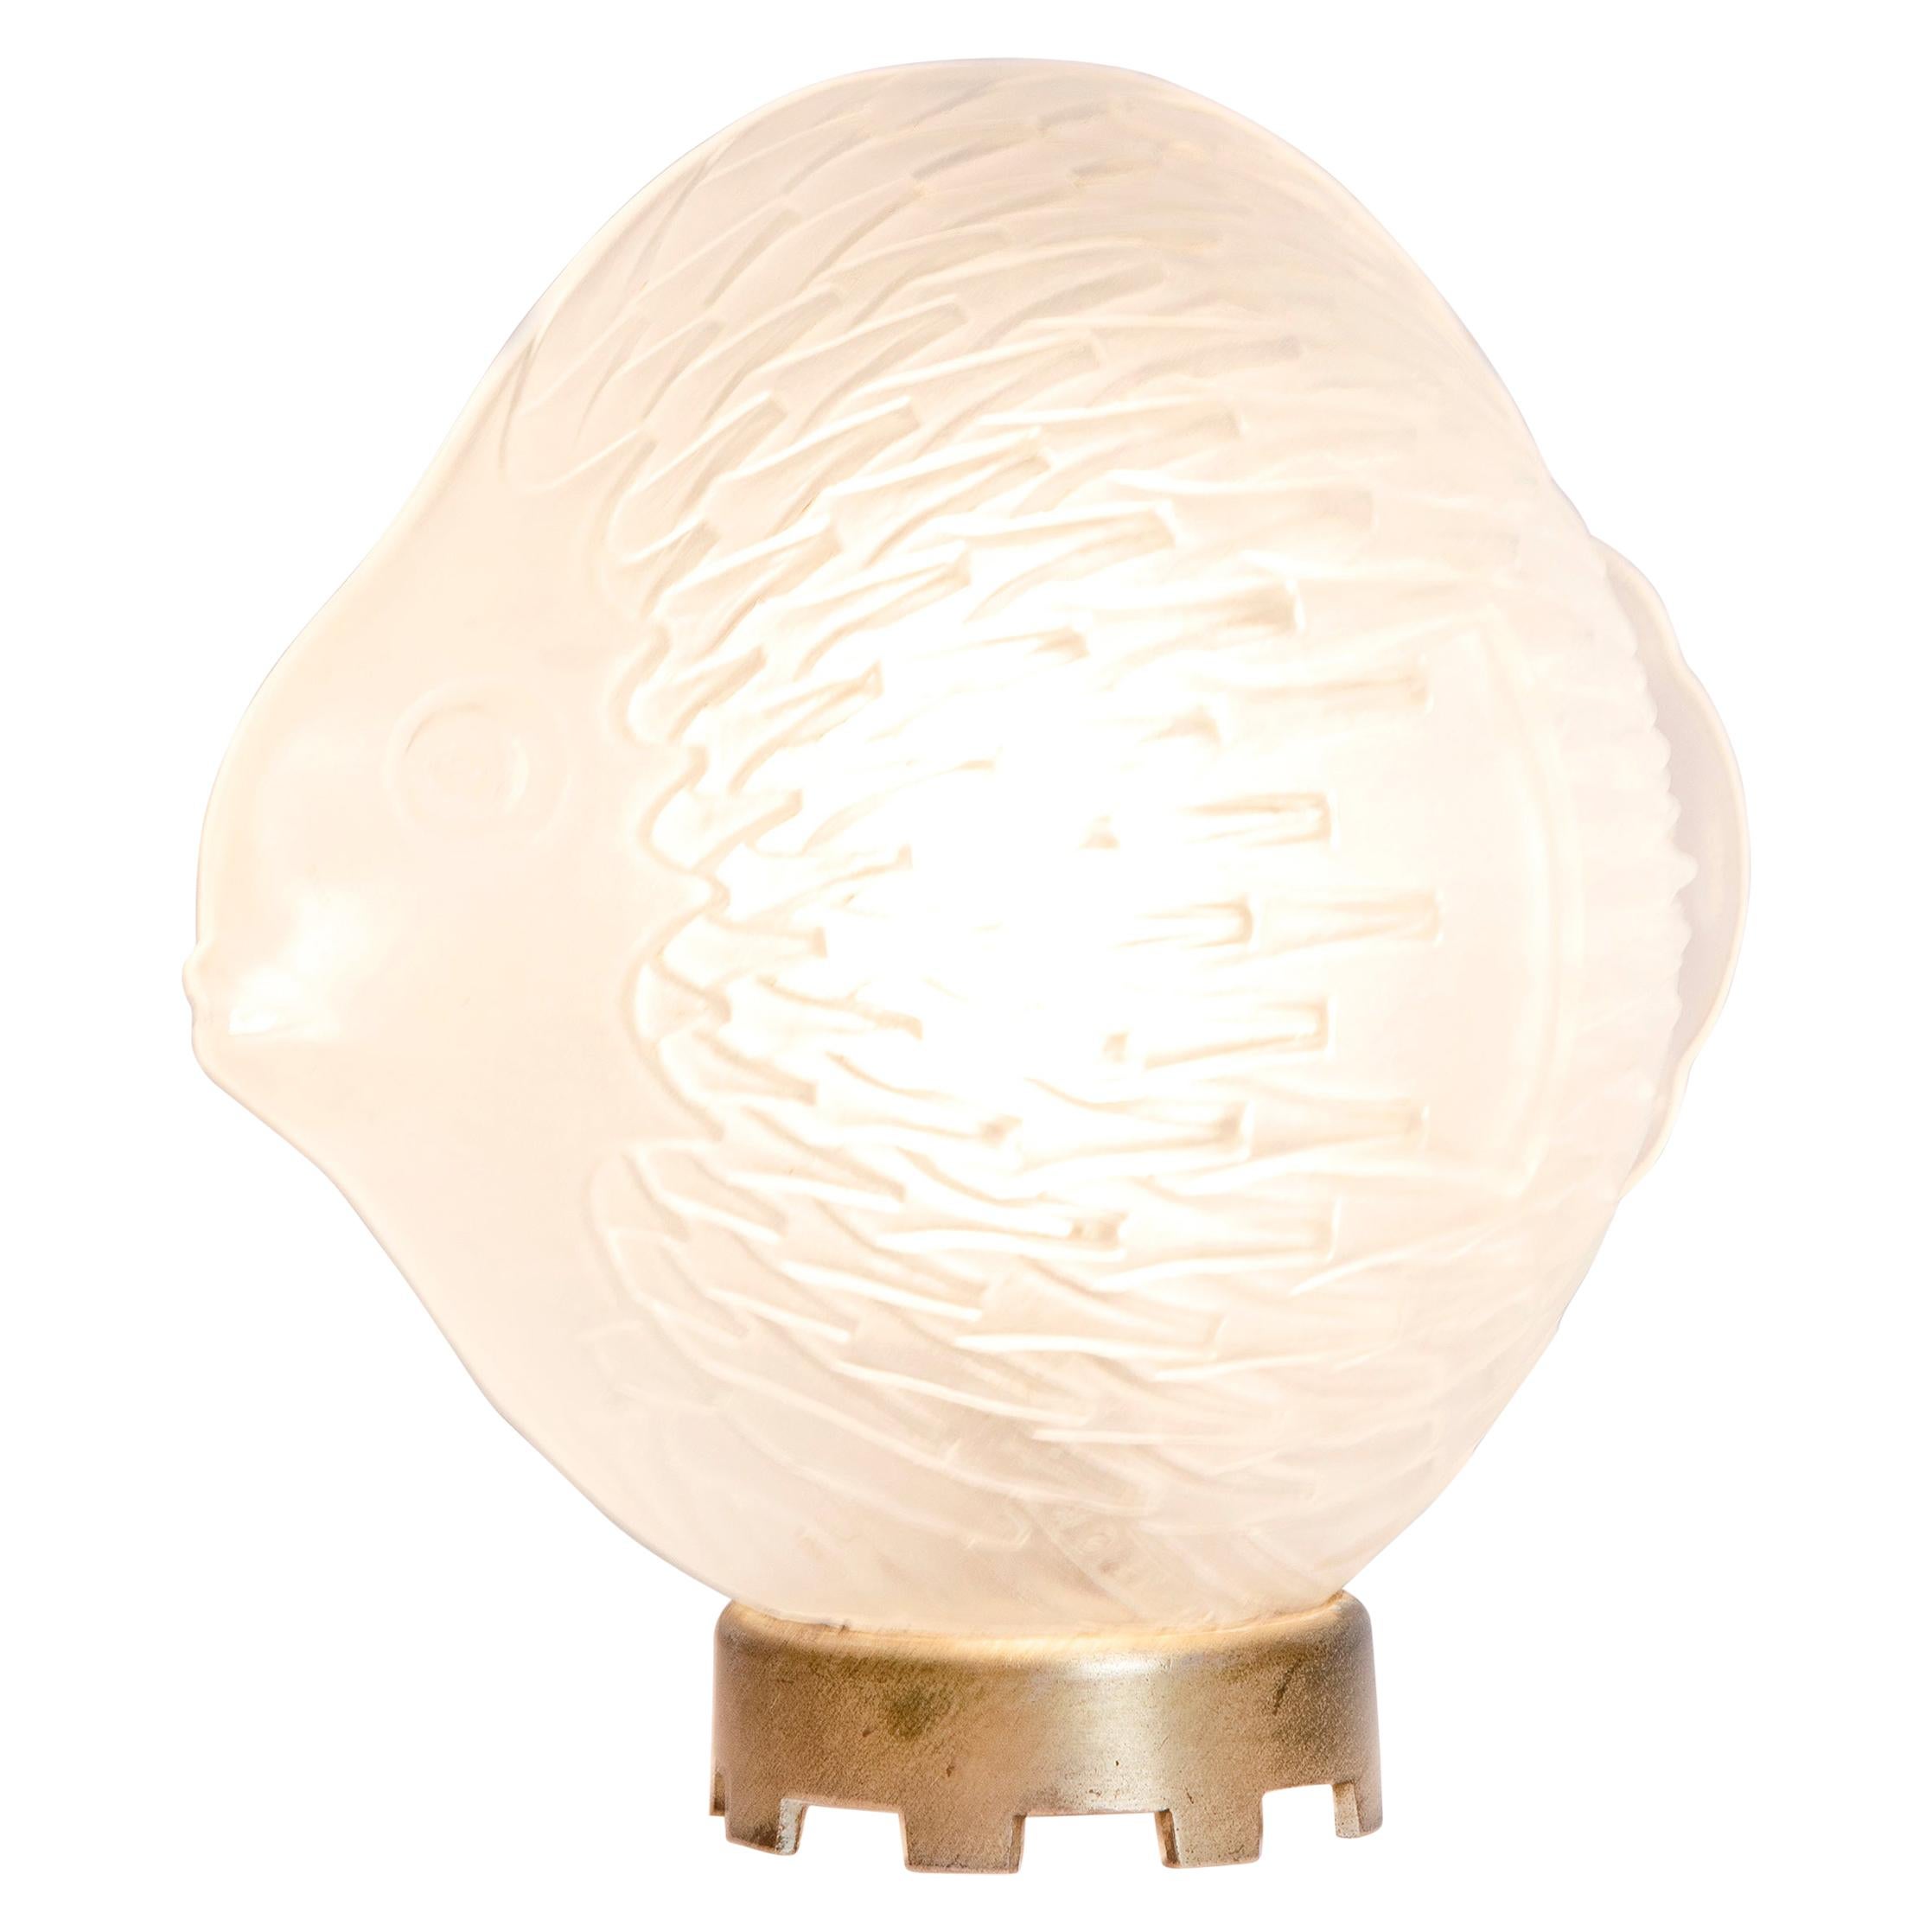 Glass and Bronze Blowfish Lamp, Art Deco Period, France, circa 1920 For Sale